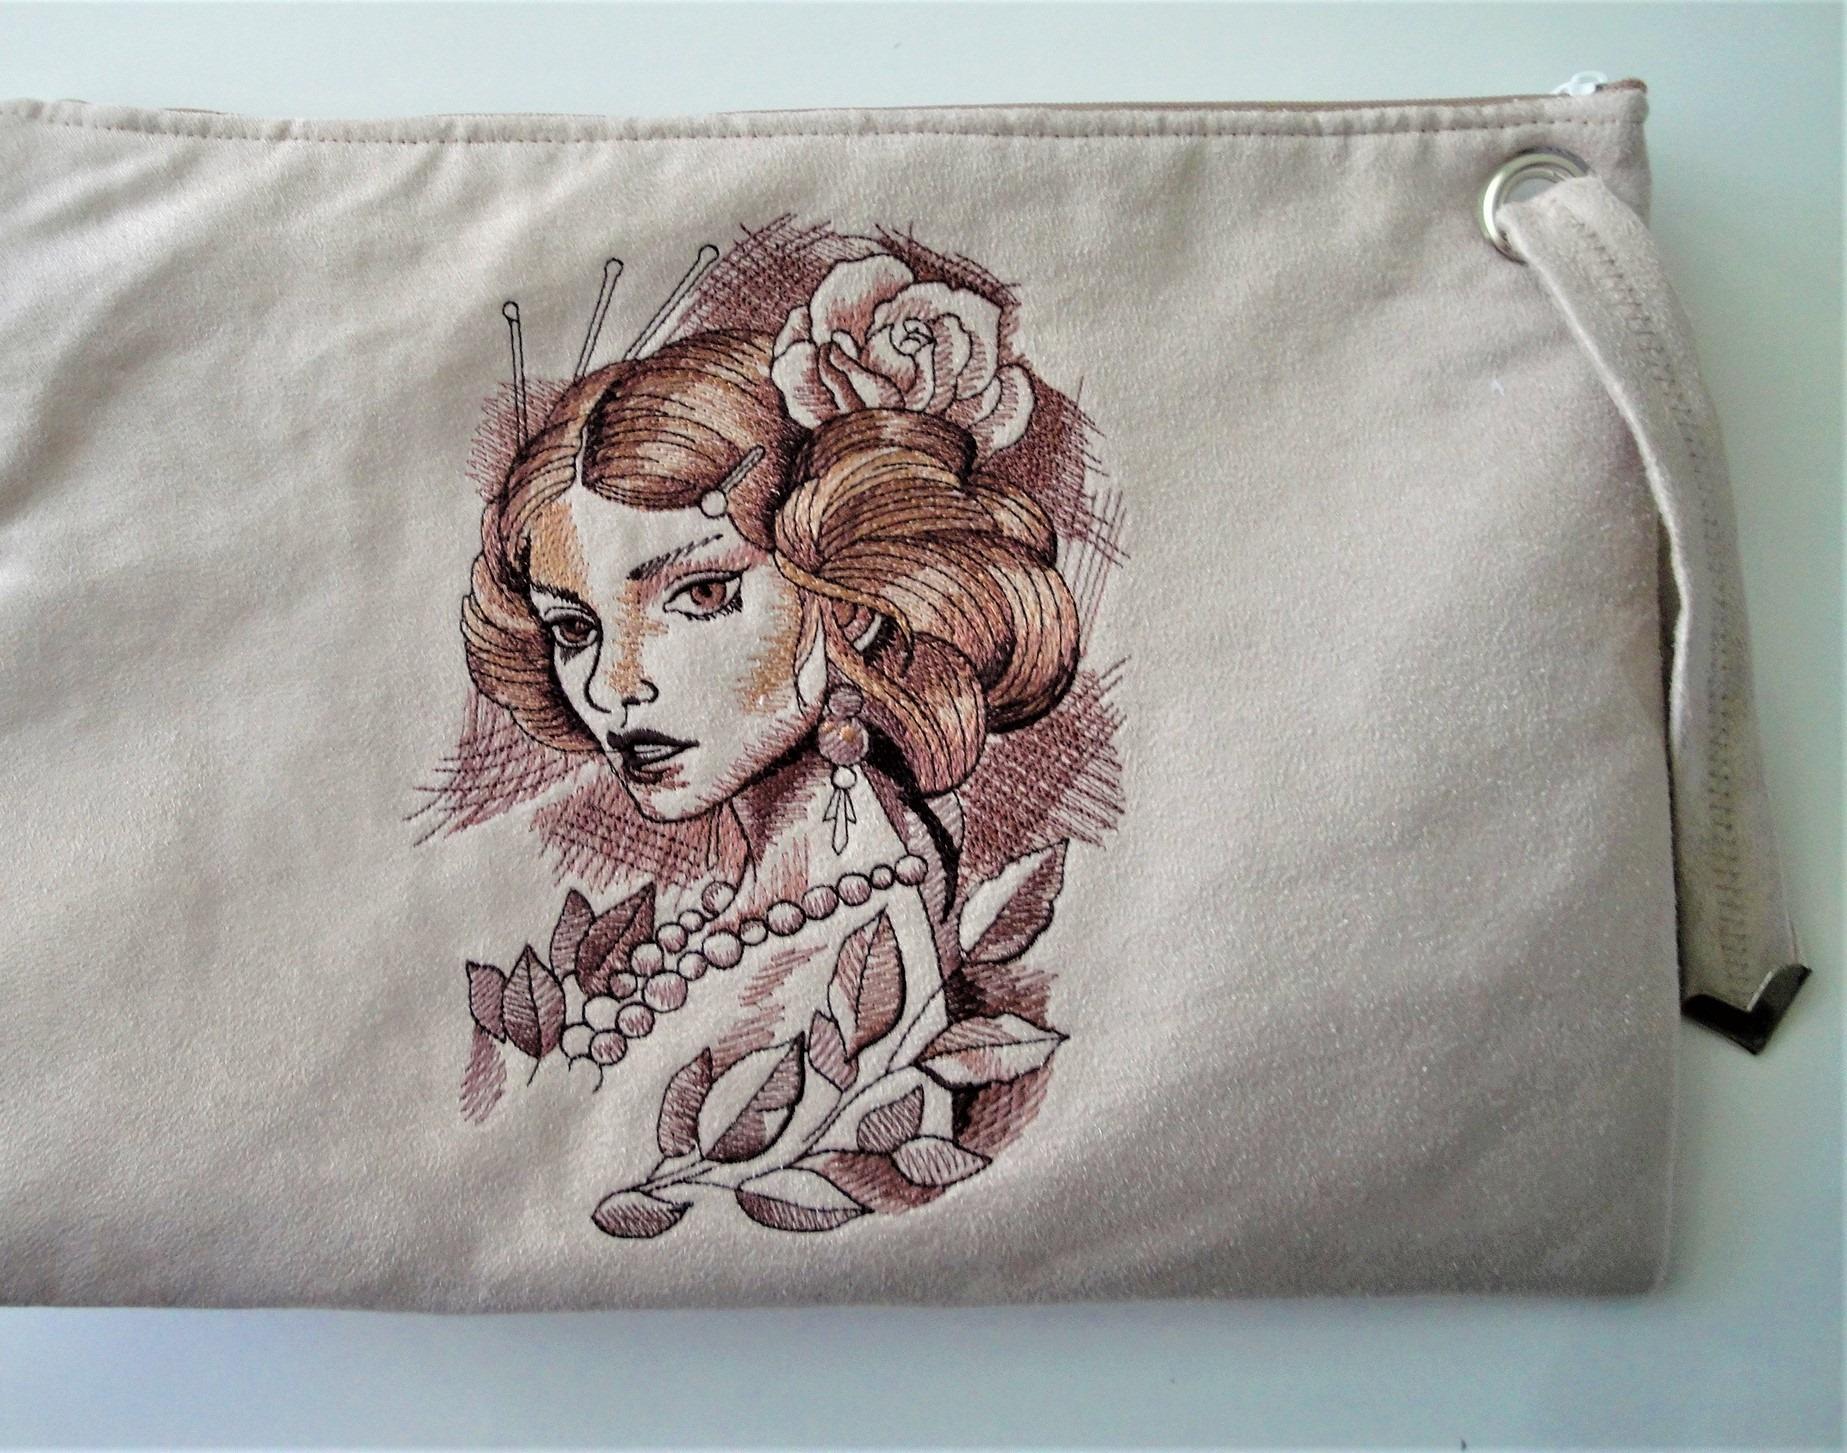 An Artistic, Emotional Twist: Embroidered Handbag with Crying lady Design